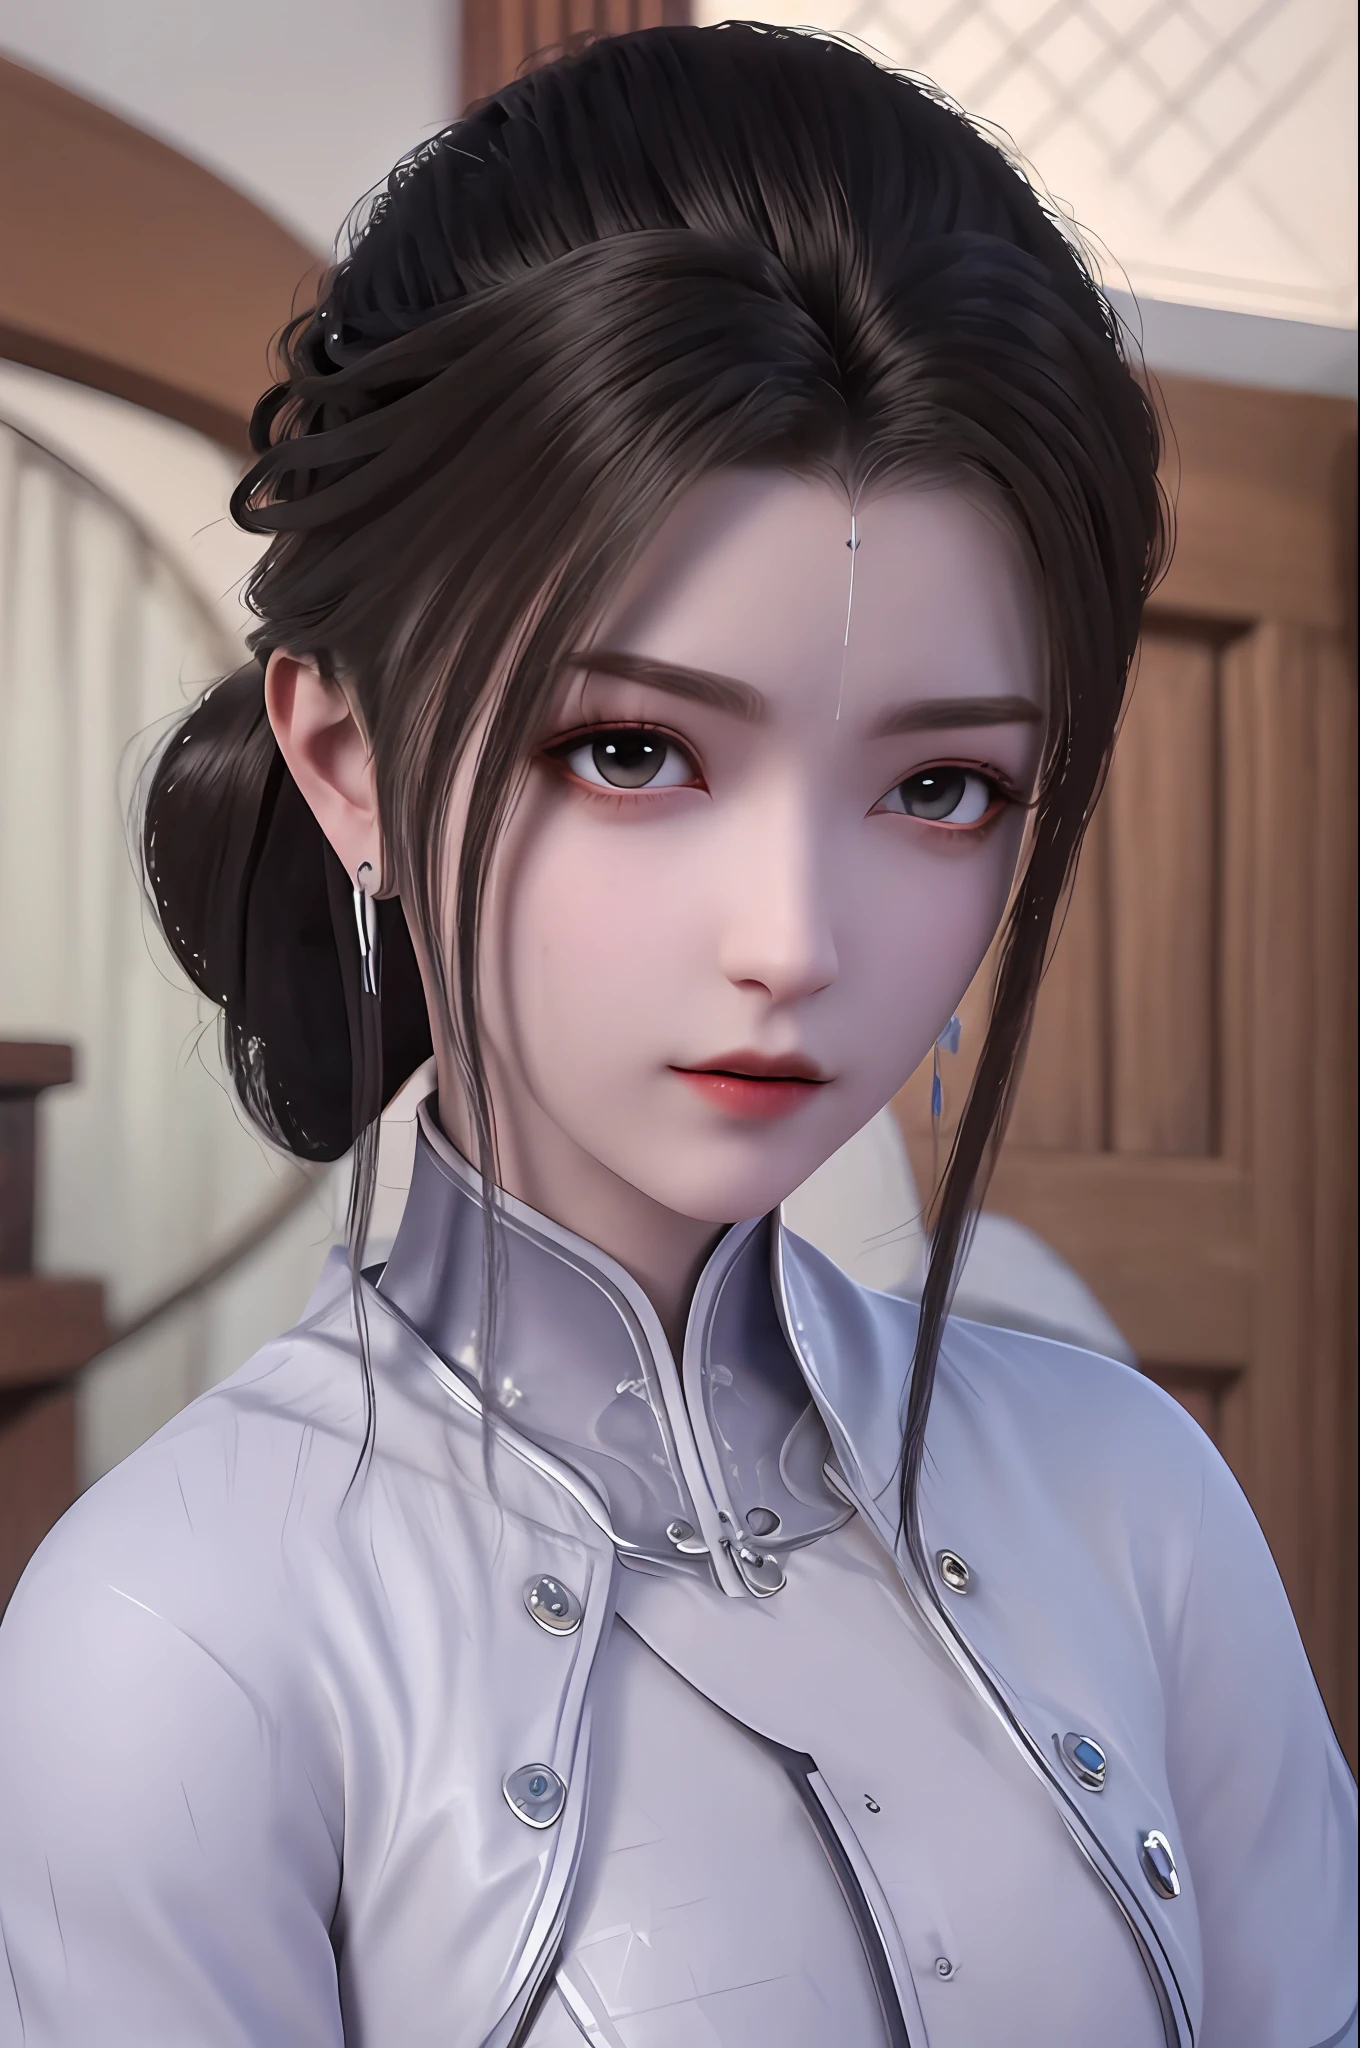 (bestquality、A masterpie:1.2)、Ultra High Res、lifelike、Front lighting、with intricate details、Exquisite details and textures、1 Mature Mature Girl(Rose)、solo、、、(young、Absolutely cute、)、Facial Highlights、fulllllbody、Detailed face、White Skin、Silver hair、ponytails、Braid hair、Watch your audience、s big eyes、Silk robes、(Hollow pattern、white,、silk)、ear ring、tiny breasts、Slim body、Luxurious room、professional Lighting、Photon mapping、 Radiosity、physically based rendering、(pull up skirt、White lace panties visible)、